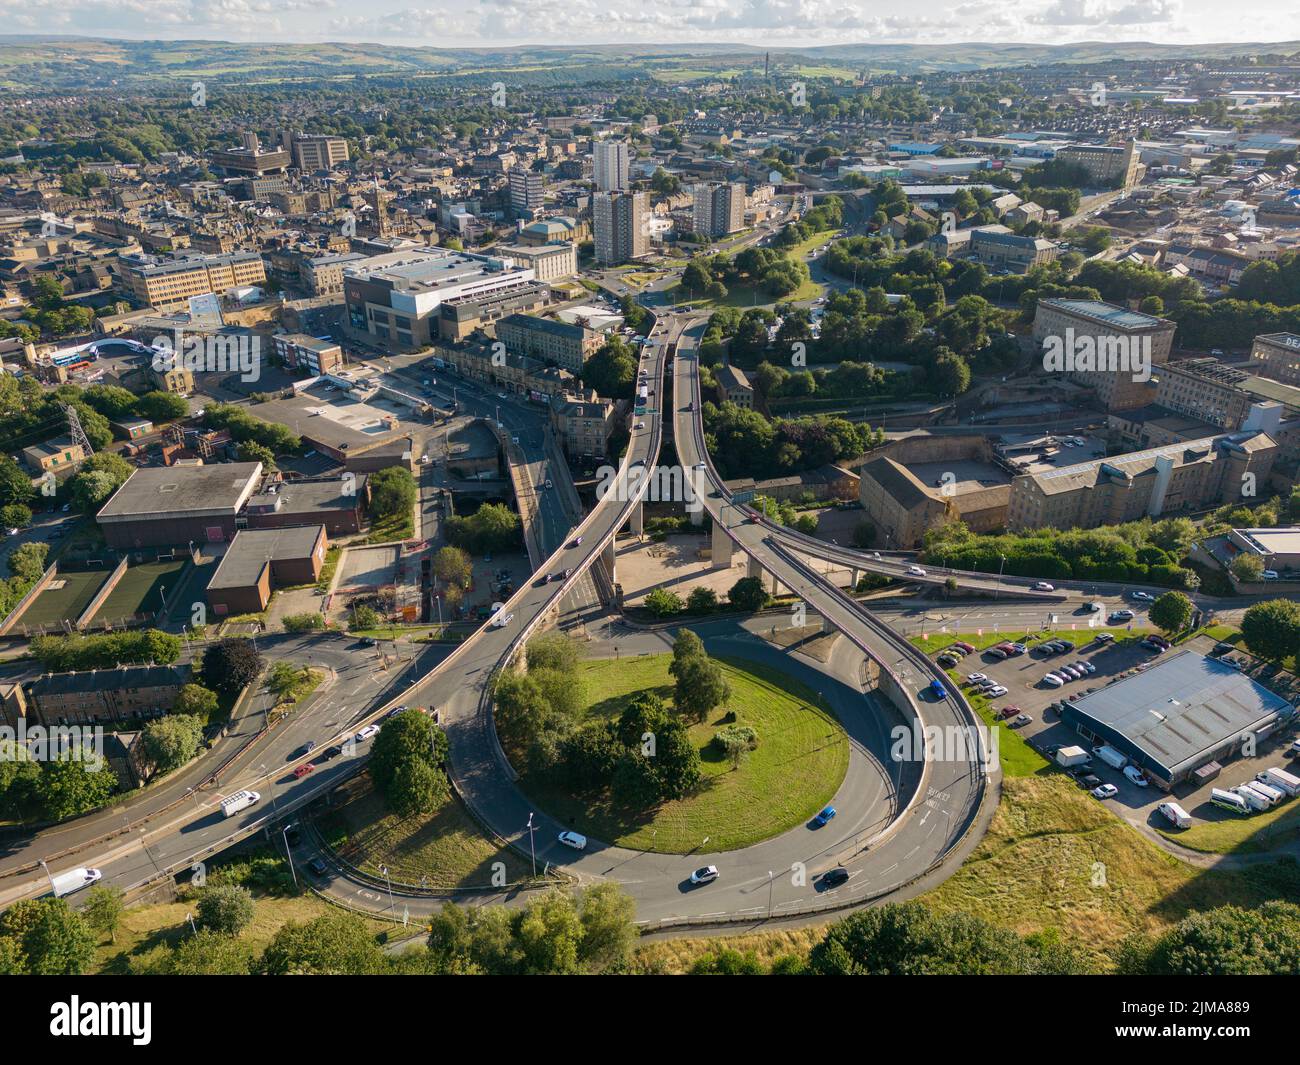 Aerial view of Burdock Way and North Bridge with the Town of Halifax, West Yorkshire, UK in the distance Stock Photo